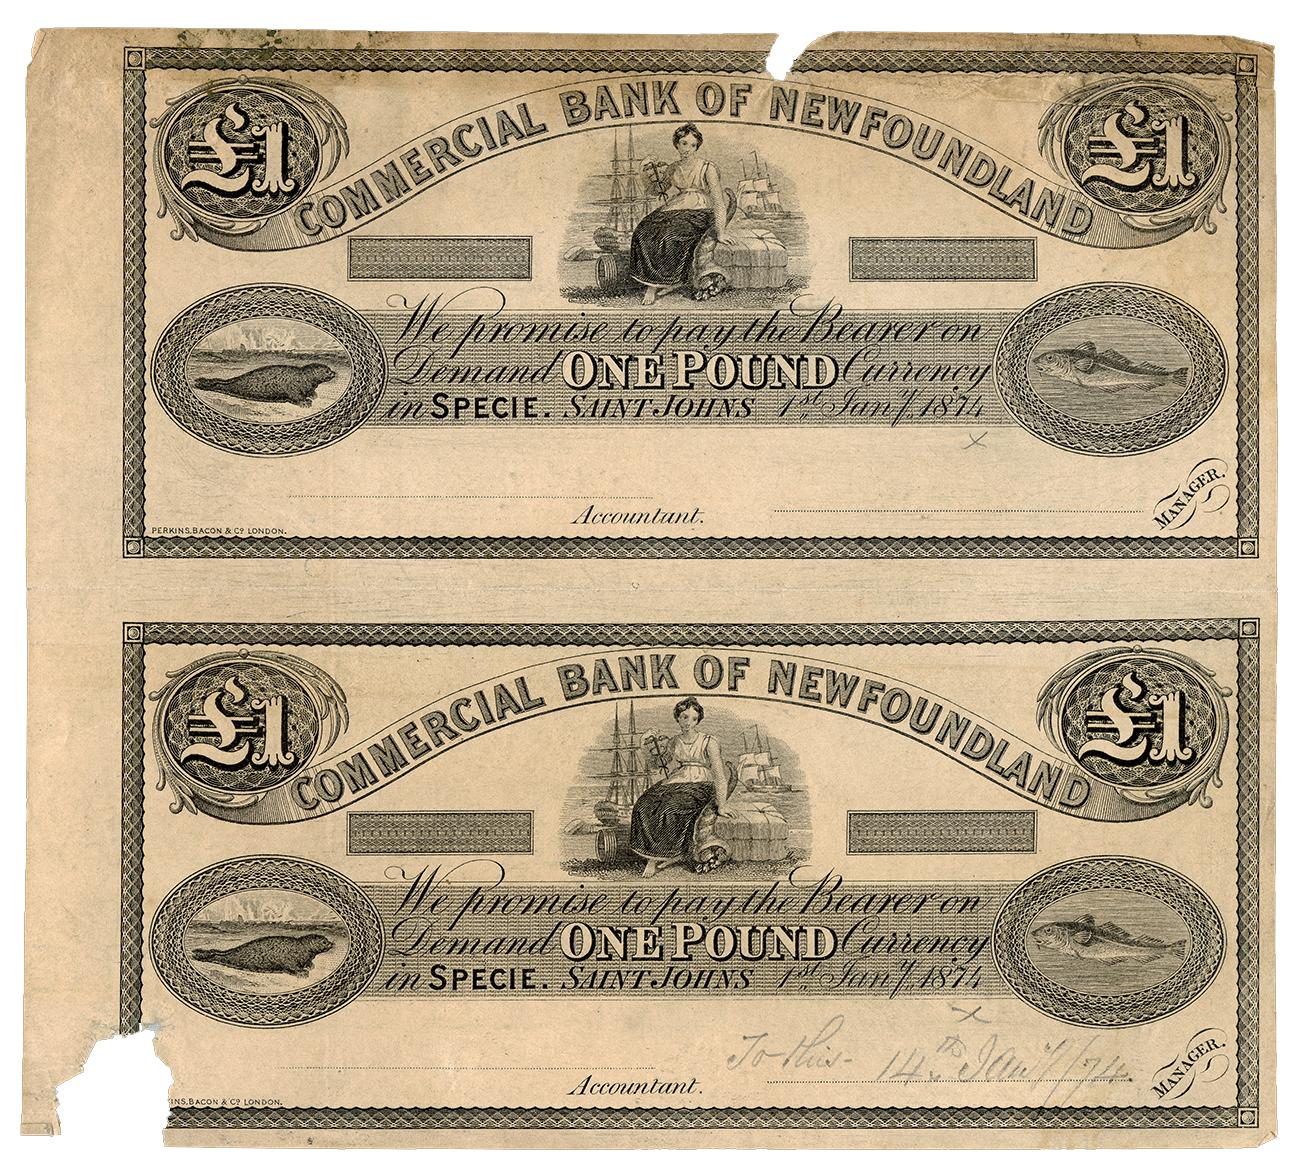 Bank notes, 2, attached together, each with a seal, a cod and an allegory of commerce.